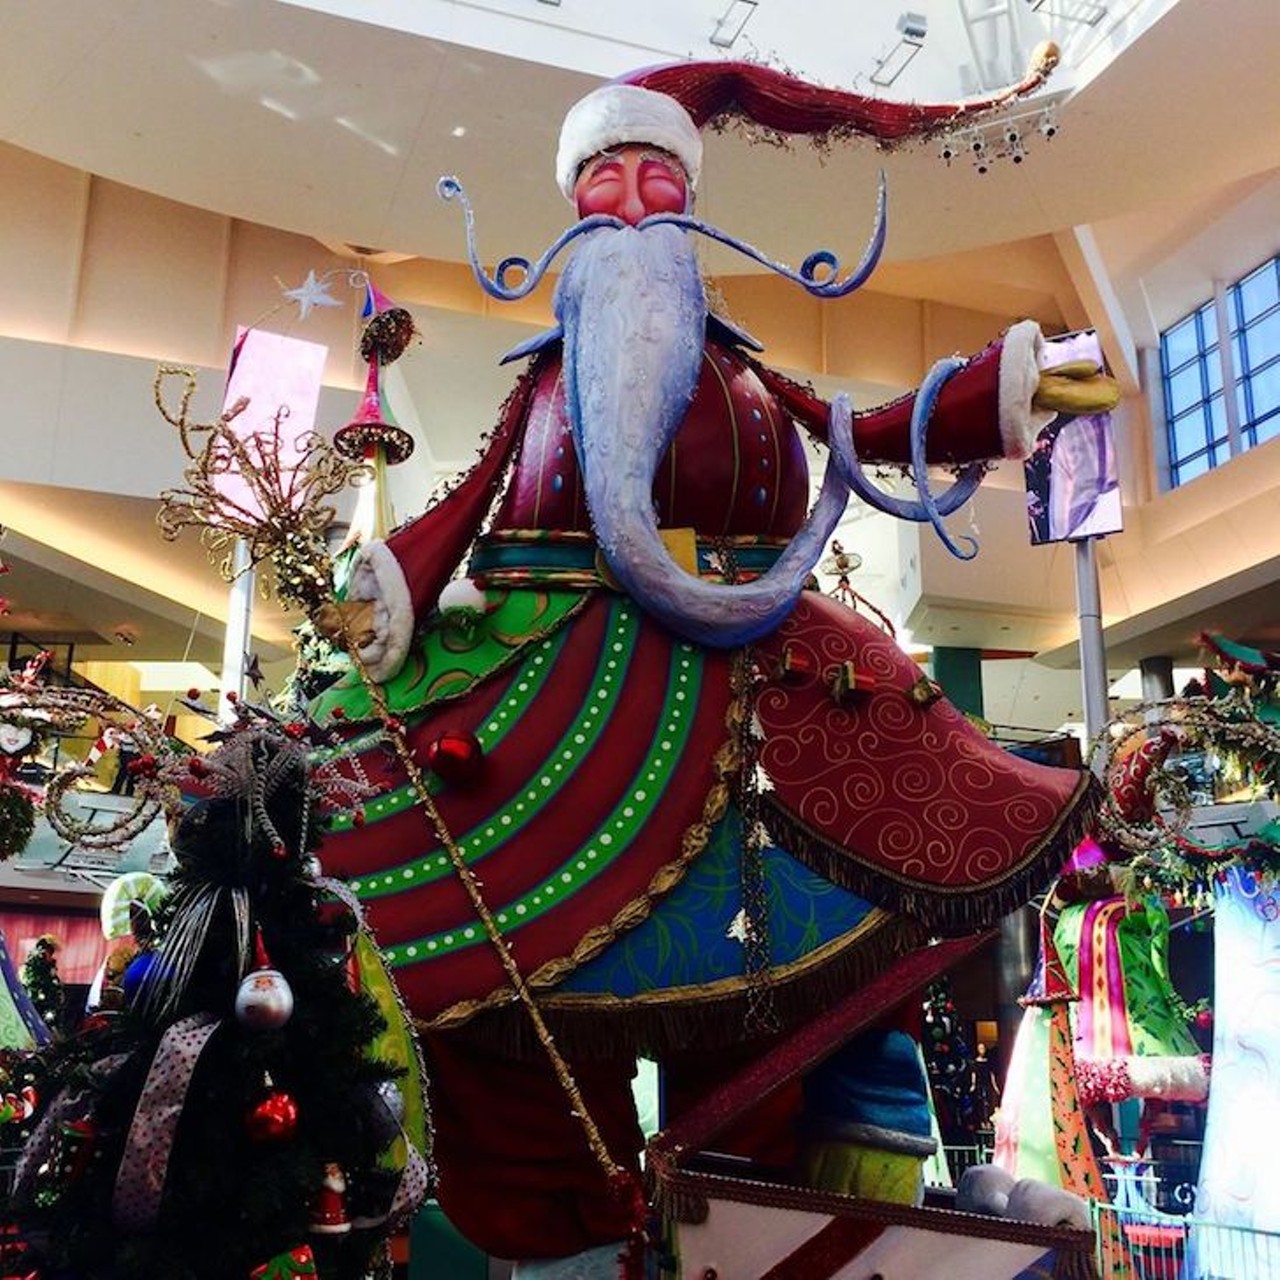 Santa Photo Experience at The Mall at Millenia
4200 Conroy Rd; 407-363-3555
Take some time out of your Christmas shopping to meet and take photos with Santa Claus at Orlando&#146;s fanciest mall. Open every day through Dec. 24 during mall hours.
Photo via Mall at Millenia/Facebook